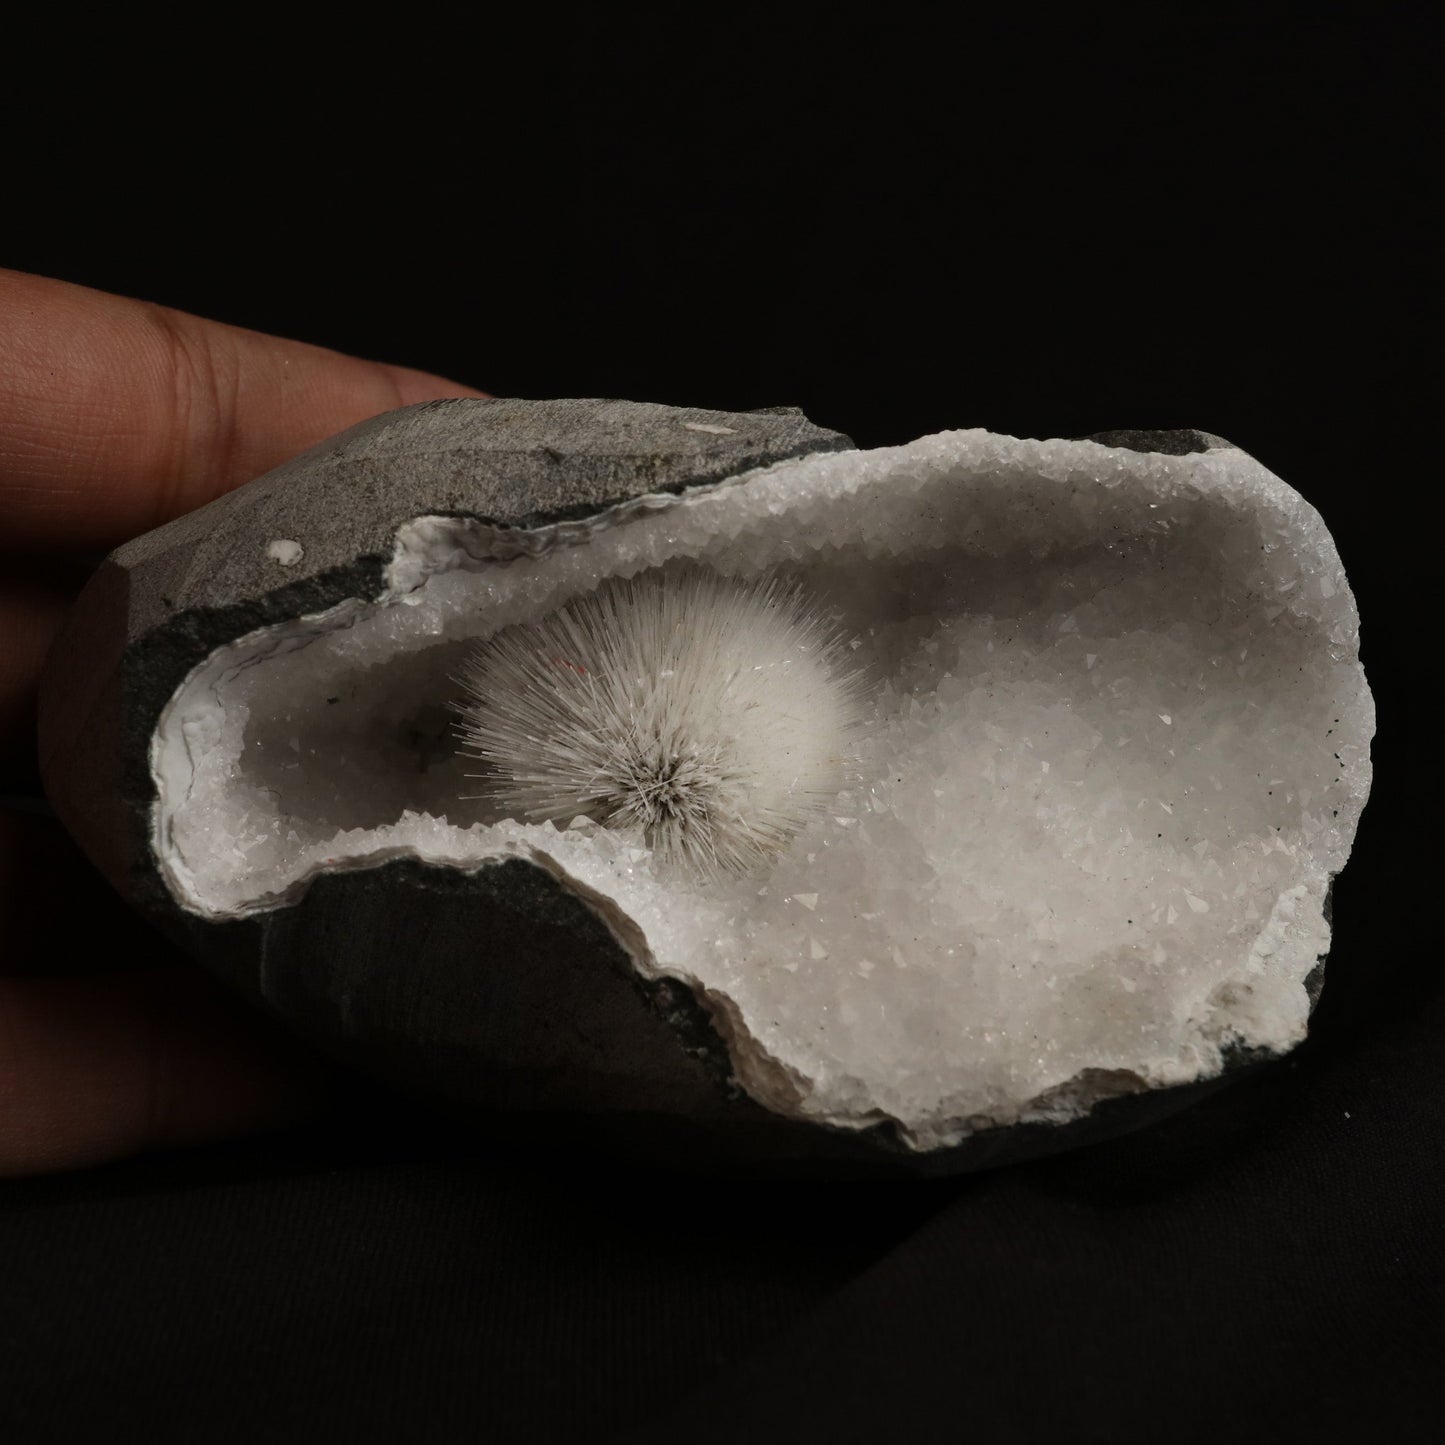 Mesolite Porcupine Spray inside MM Quartz Geode Natural Mineral Speci…  https://www.superbminerals.us/products/mesolite-porcupine-spray-inside-mm-quartz-geode-natural-mineral-specimen-b-5055  Features: Very fine Mesolite needle-like soft threads are in the geode of quartz. A beautiful blend of small crystals of shiny quartz and black geode. Primary Mineral(s): MesoliteSecondary Mineral(s): N/AMatrix: N/A 4 Inch x 2.5 InchWeight : 521 GmsLocality: Pune, Maharashtra, India Year of Discovery: 2021